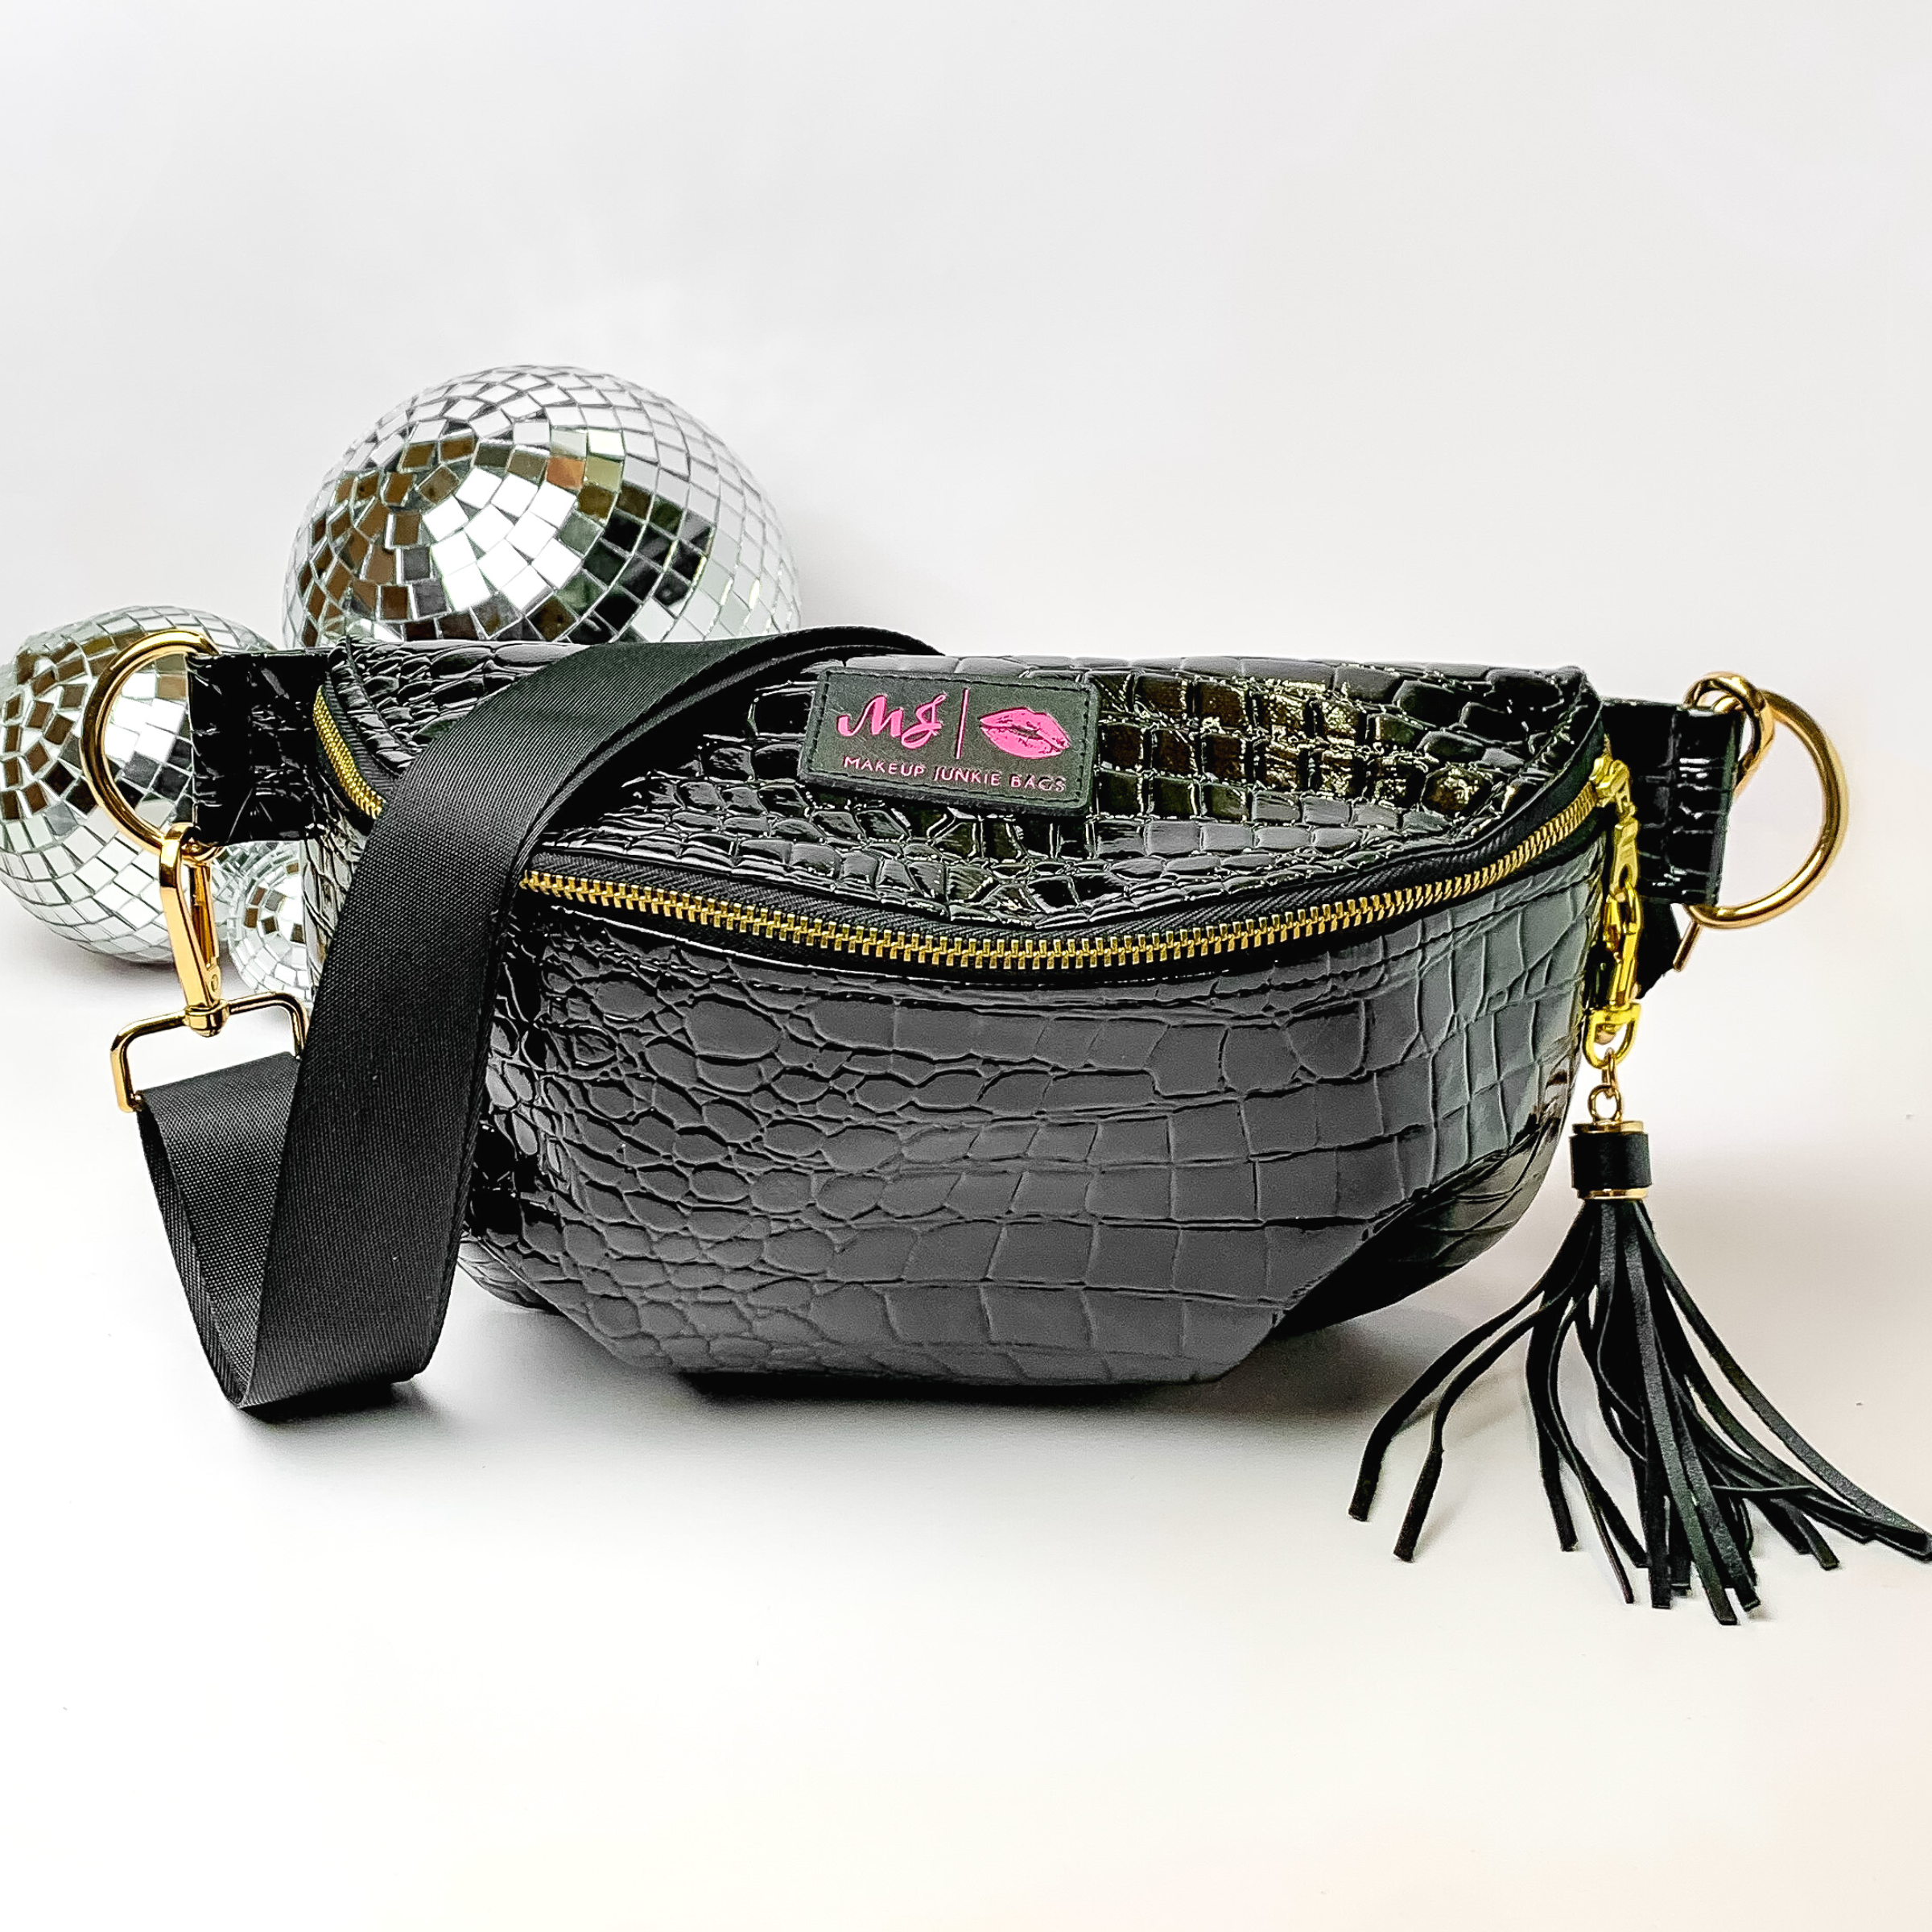 Black, croc print fanny pack with a black strap. This bag includes gold accents, a gold zipper, and a black tassel. This bag also has a pink stitched logo for Makeup Junkie. This fanny pack is pictured on a white background in front of disco balls. 